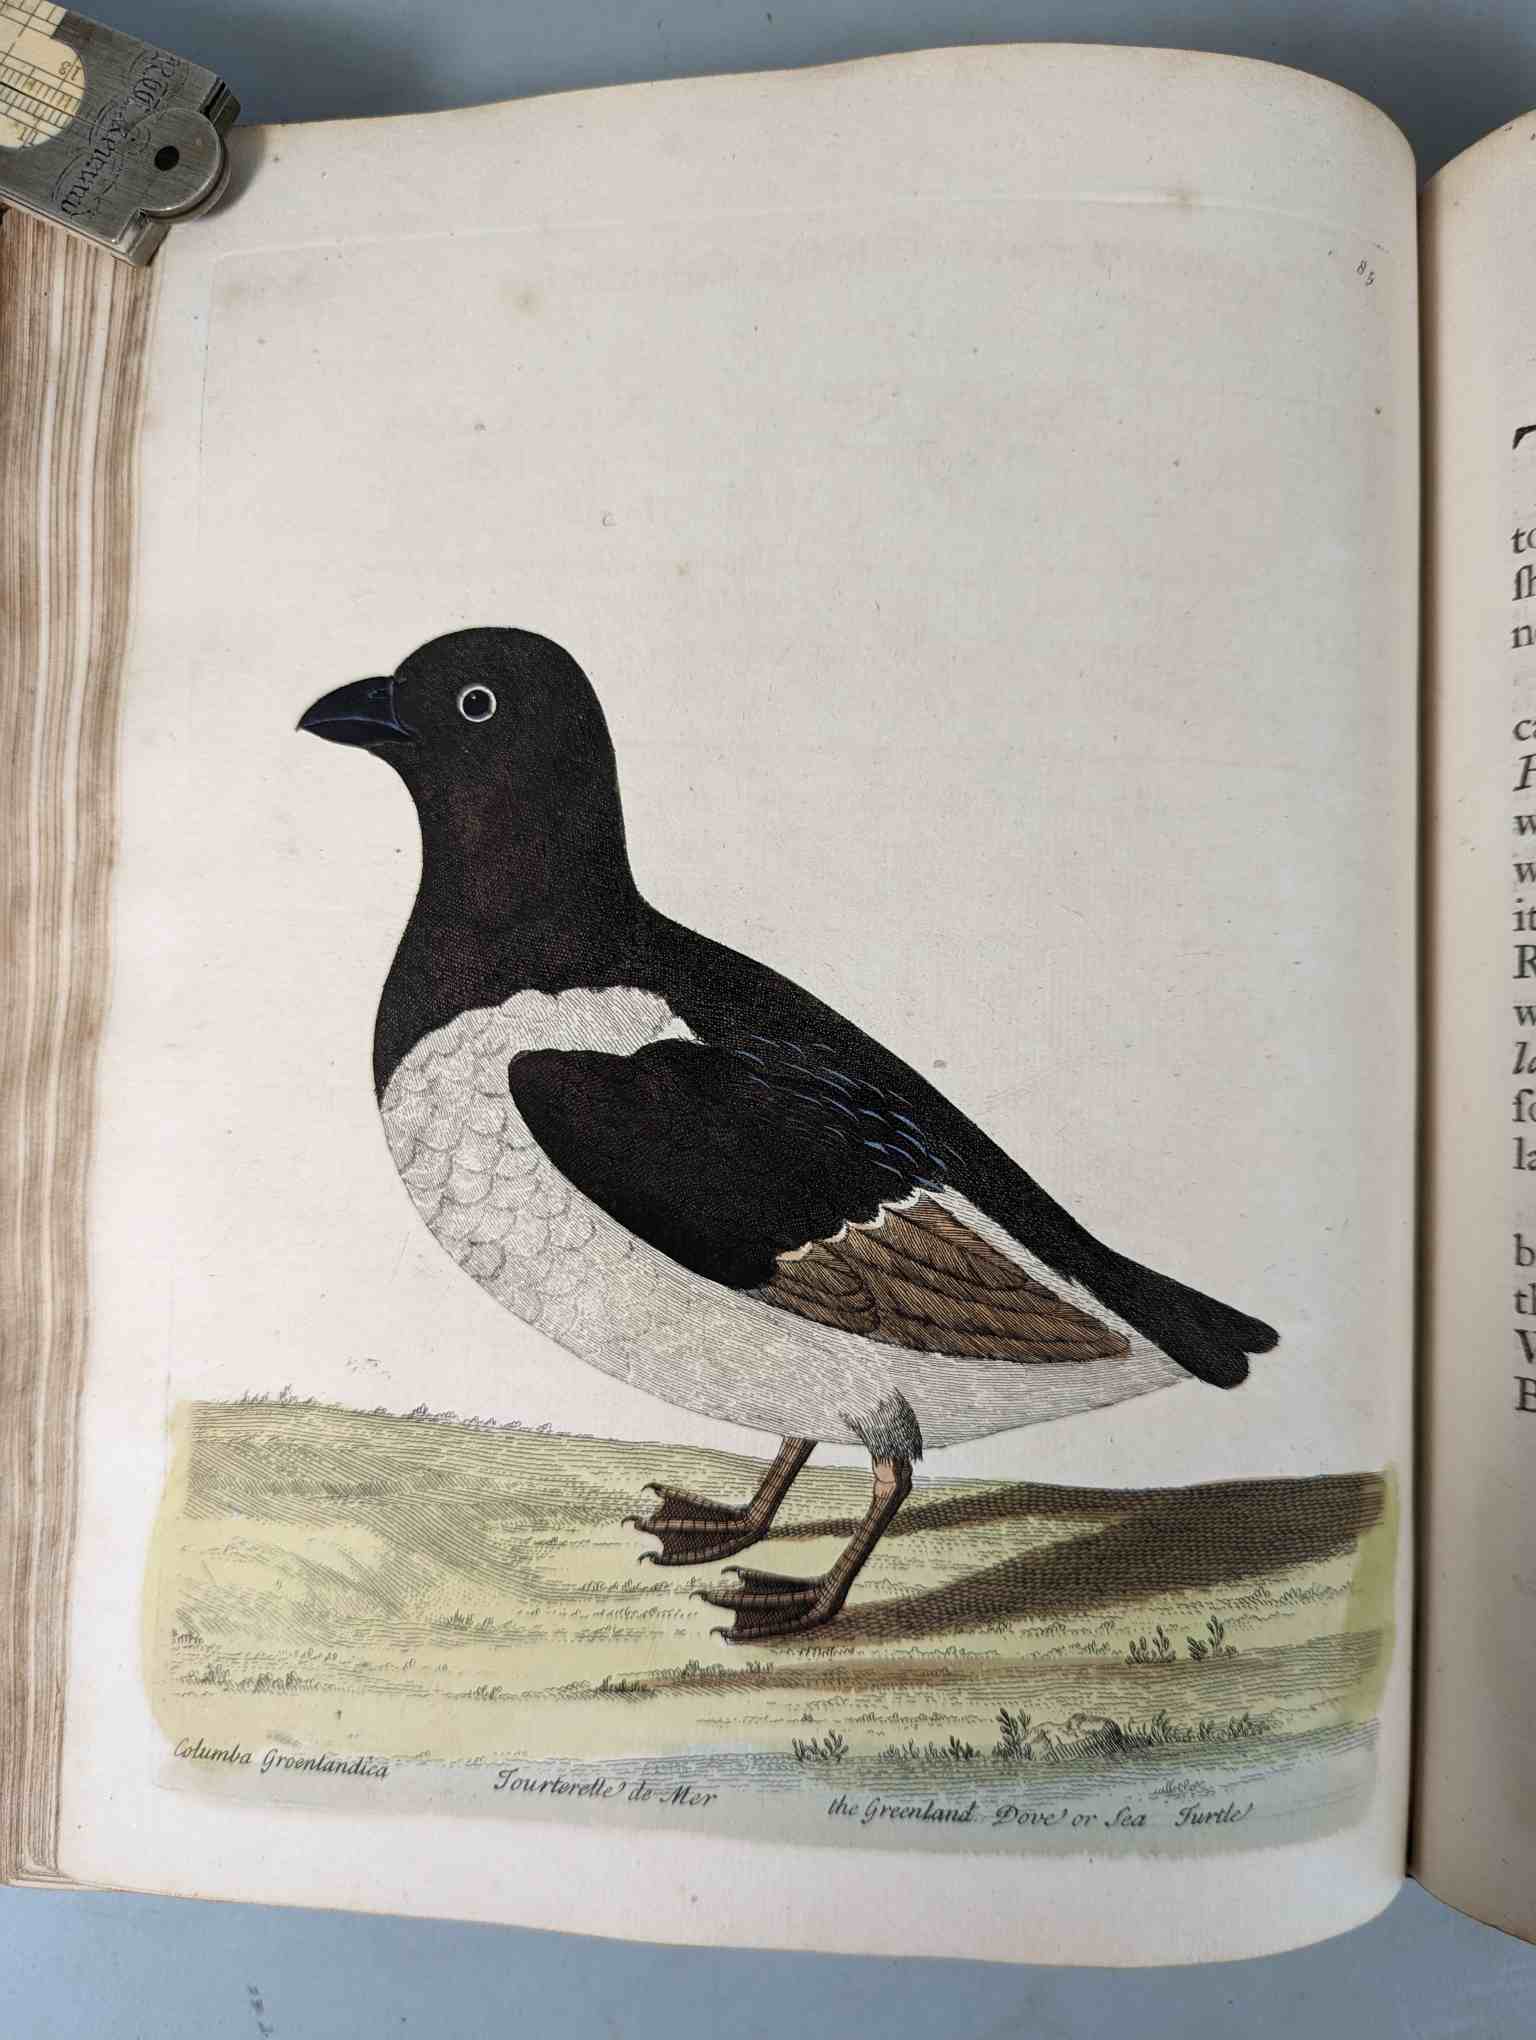 ALBIN, Eleazar. A Natural History of Birds, to which are added, Notes and Observations by W. - Image 88 of 208